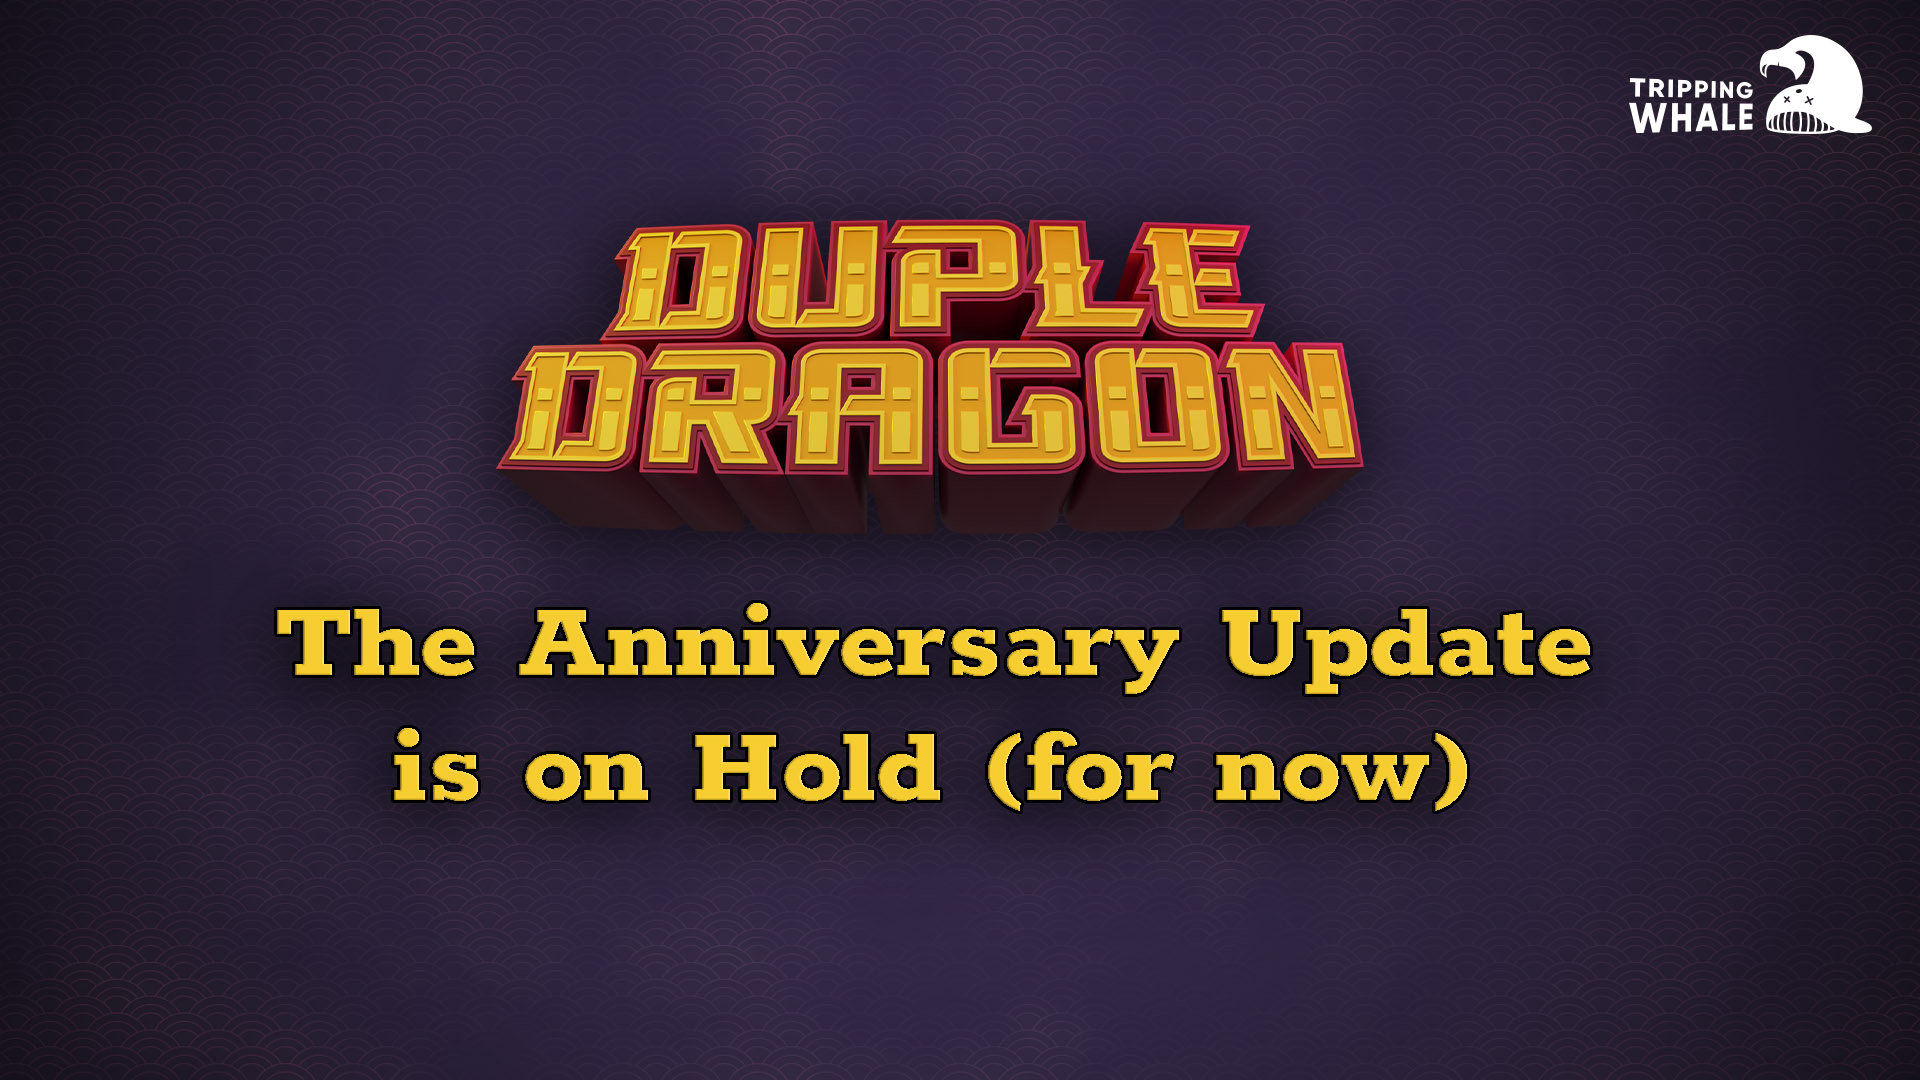 The Anniversary Update is on Hold for Now